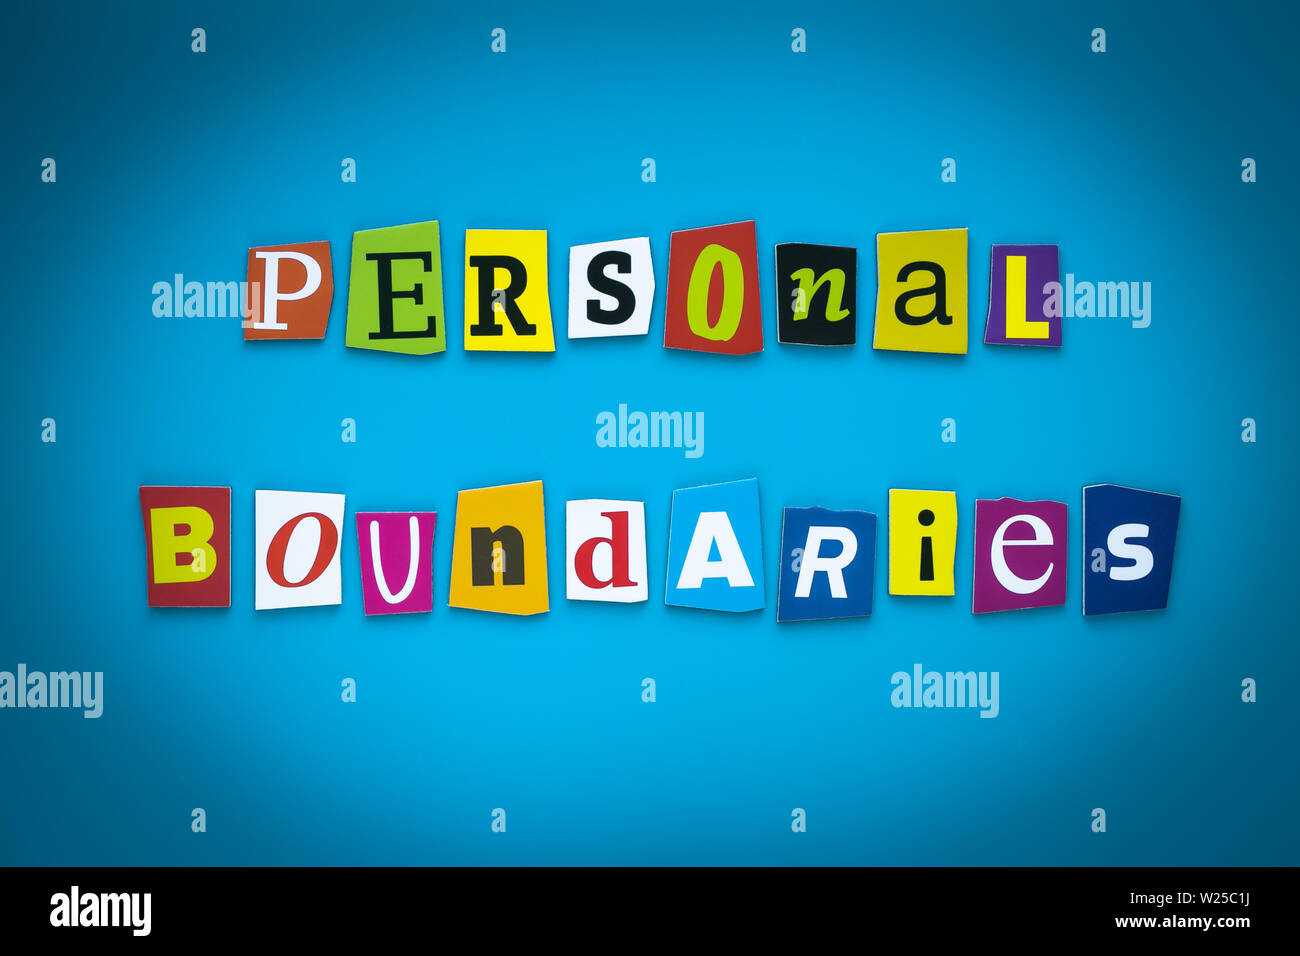 A word writing text - personal boundaries - from cut letters on a blue background. Headline, card, banner with inscription. Psychologic concept. Stock Photo